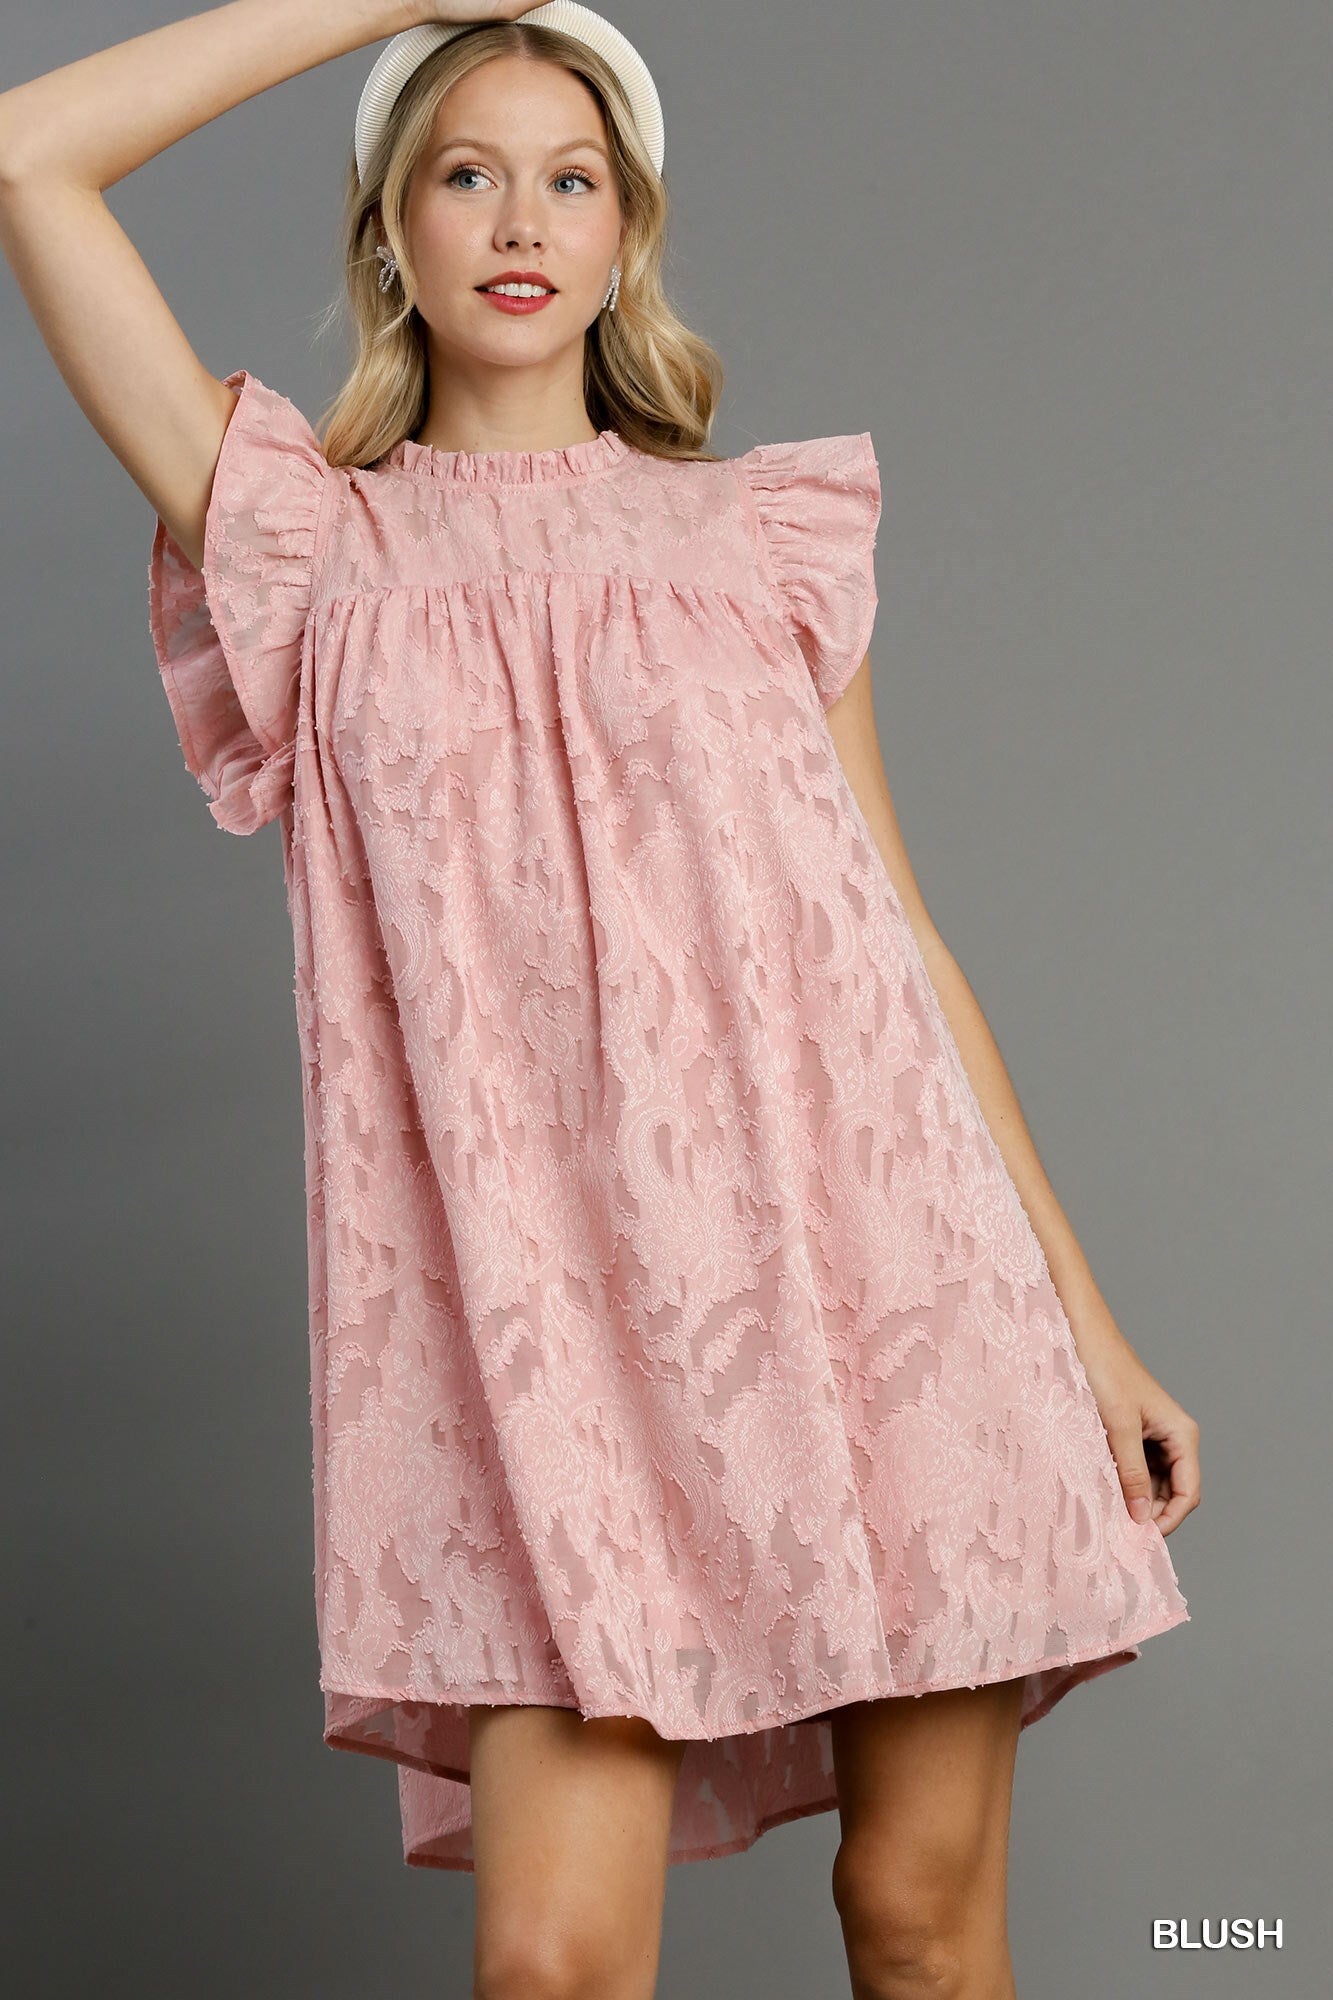 Ruffle Lace Short Sleeve Dress in Blush Jacquard with Delicate Back Button Keyhole